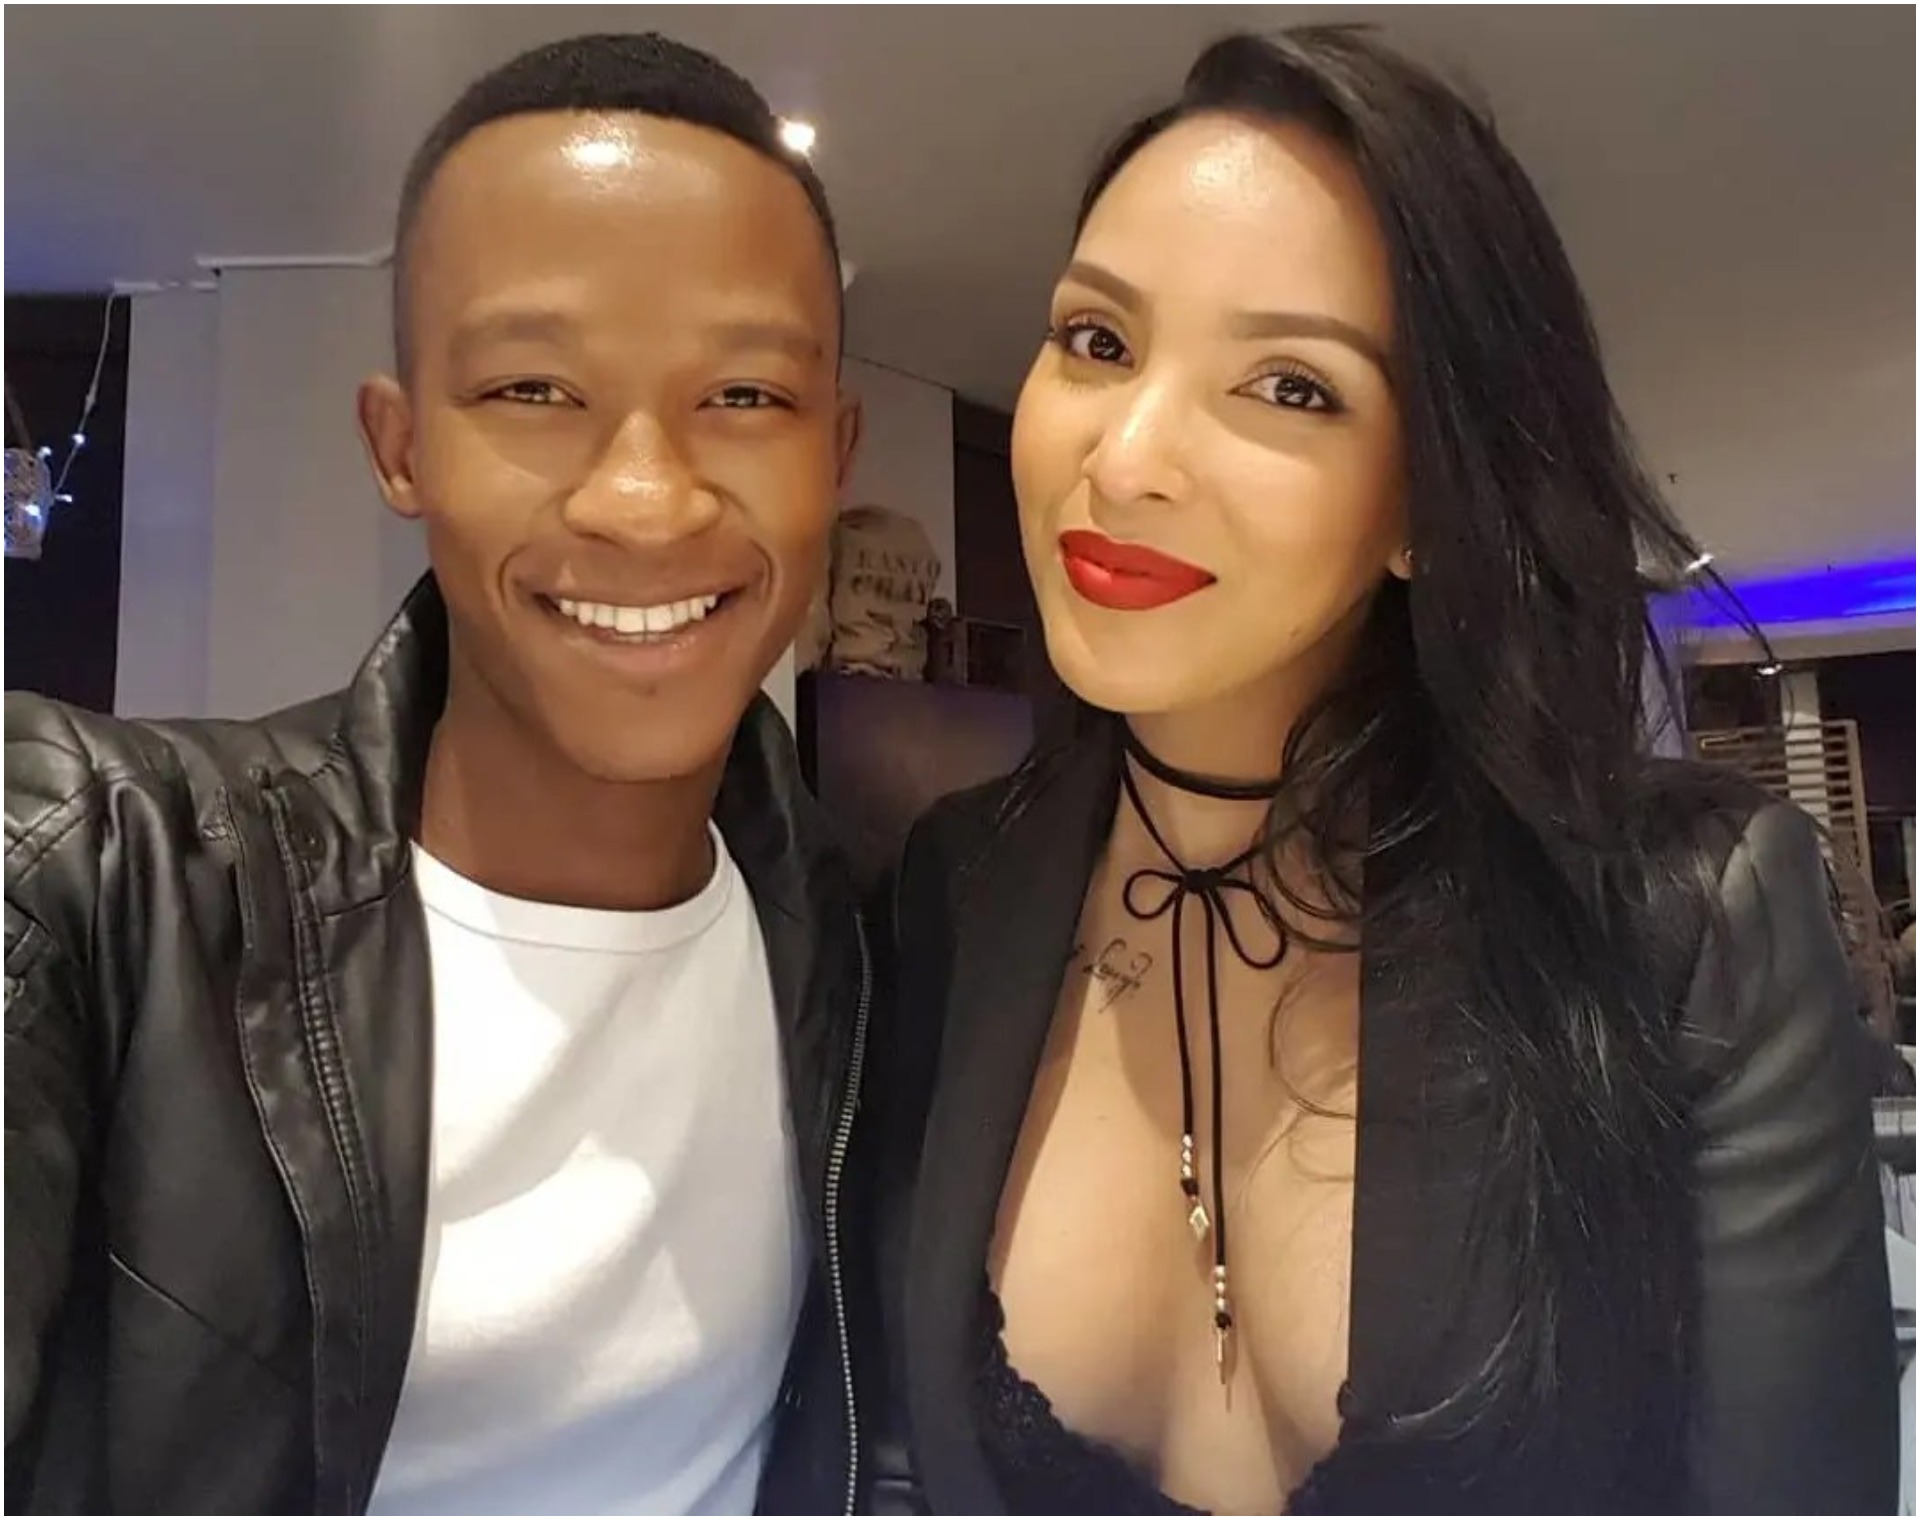 After a two-year nightmare, television personality Katlego Maboe has finally won his court case against former lover Monique Muller. The Magistrate absolved Katlego of all allegations of misconduct towards his former partner and ruled that there were no grounds for the protection order. Maboe came under fire in October 2020, as social media called for him to be cancelled following a cheating scandal. This was after his wife posted a video in which he confessed to cheating on her with fellow Outsurance colleague Nikita Murray. A fiery Monique revealed that she had contracted an STD, allegedly from Maboe, which resulted in her getting cancer, which was compromising her ability to have another baby. The STD was later revealed to be HPV. Monique’s brother Seth Muller also took to social media to expose his brother, alleging that he was also physically abusive to his wife apart from being adulterous. While admitting that he has cheated on his wife, Katlego Maboe strenuously denied the allegations that he was physically abusive. He also said that it was yet to be proven that he had infected her with an STI. He then took legal action to clear his name. Maboe took to social media to share the news following the Magistrate's ruling, which cleared him. Below is his full statement,